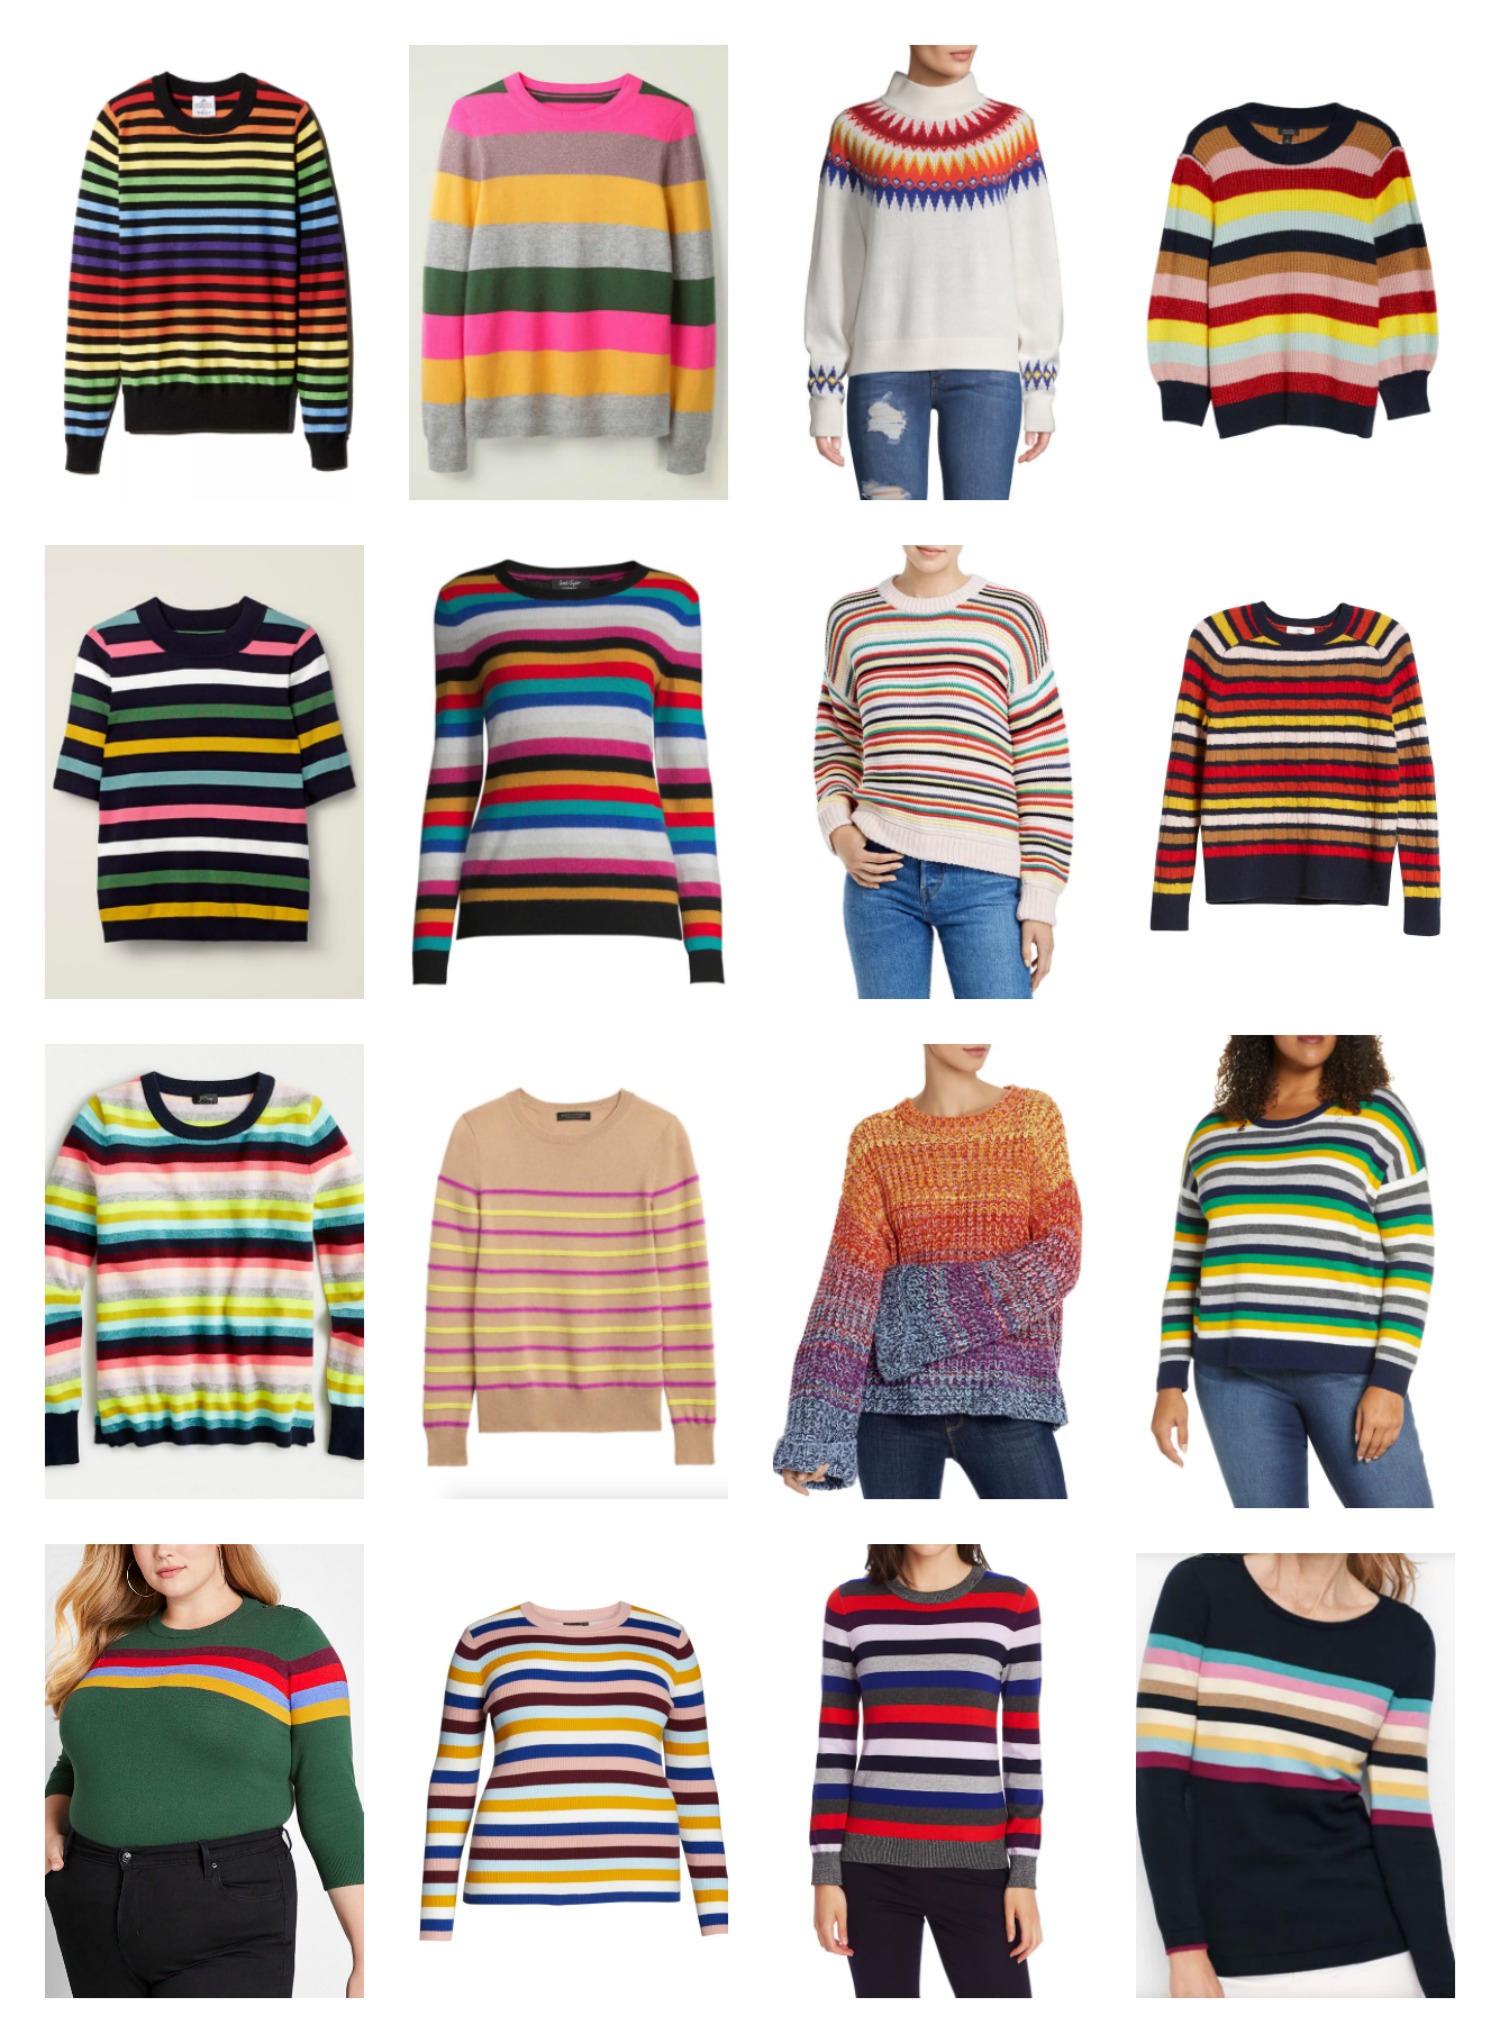 Sunshine on a Rainy Day: The Best Striped Sweaters